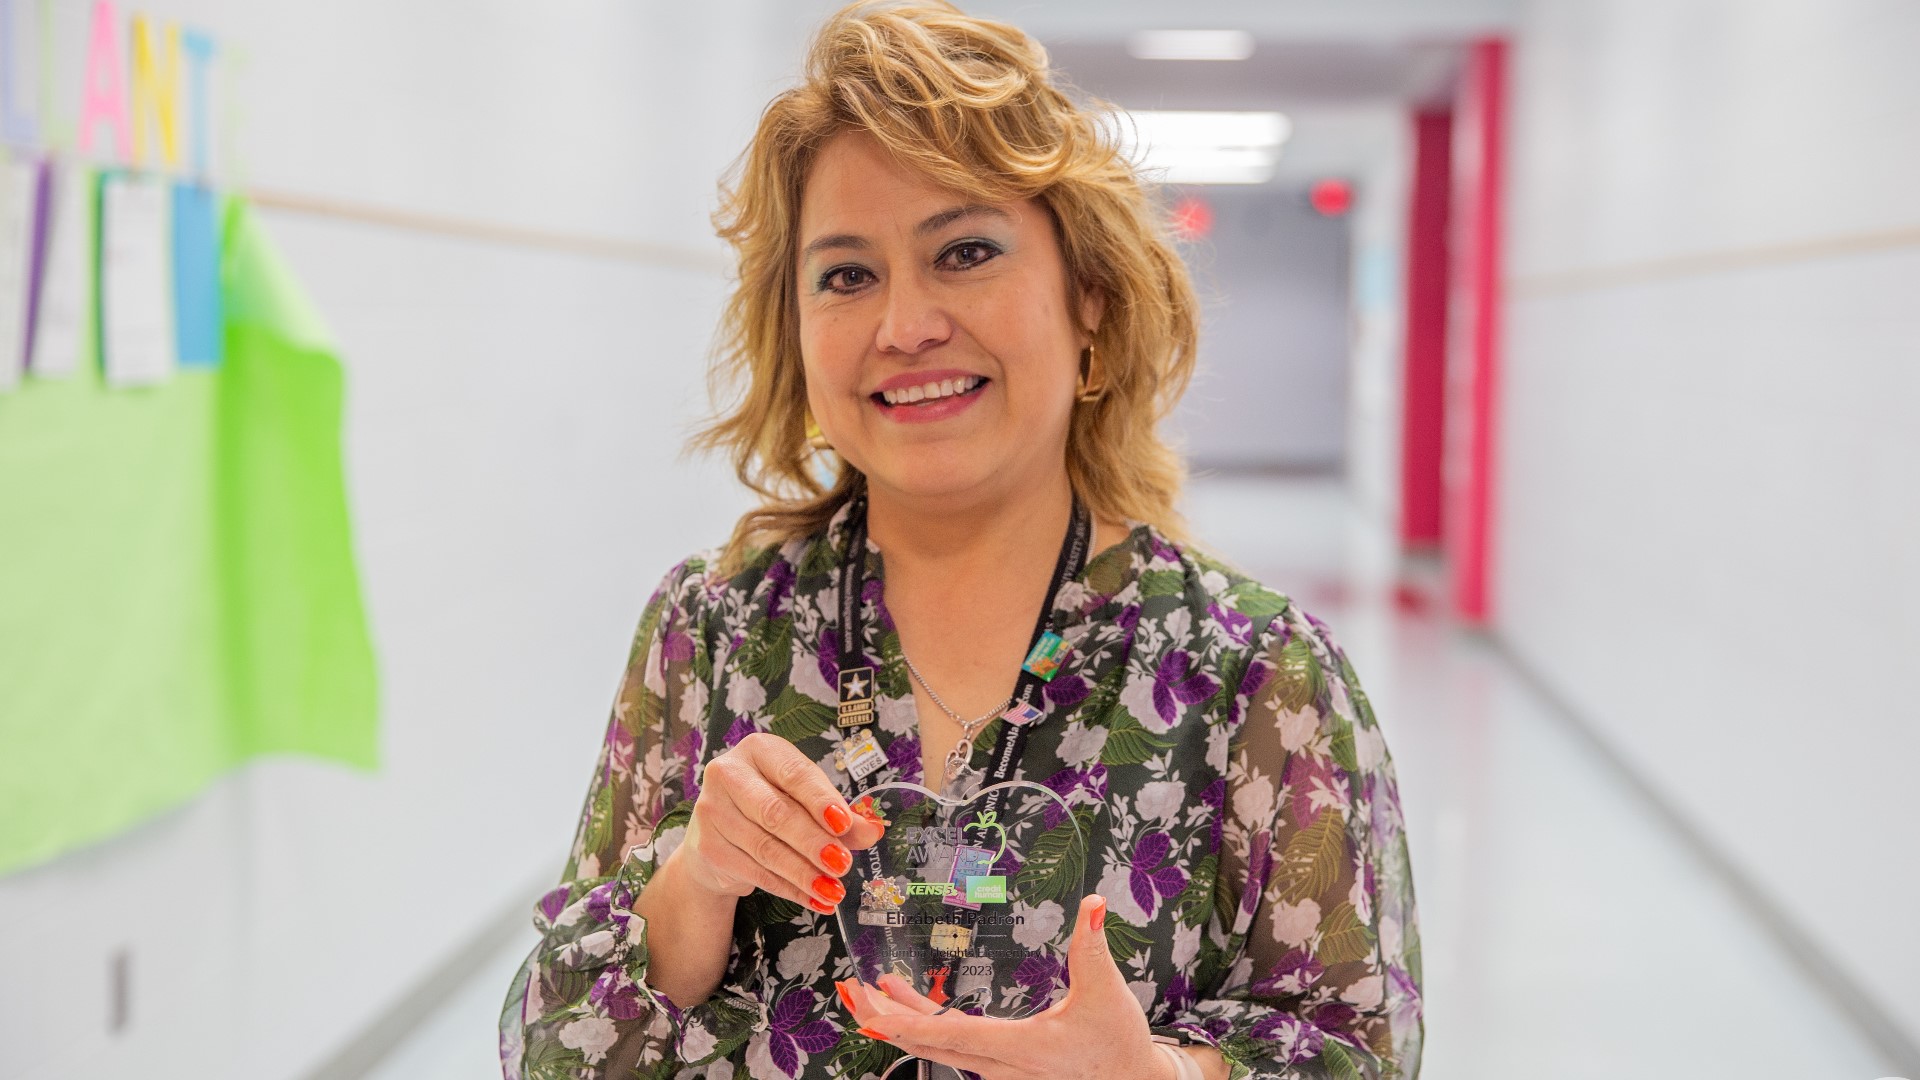 Padron has more than 15 years in education and said her love of kids is what brought her to the classroom.